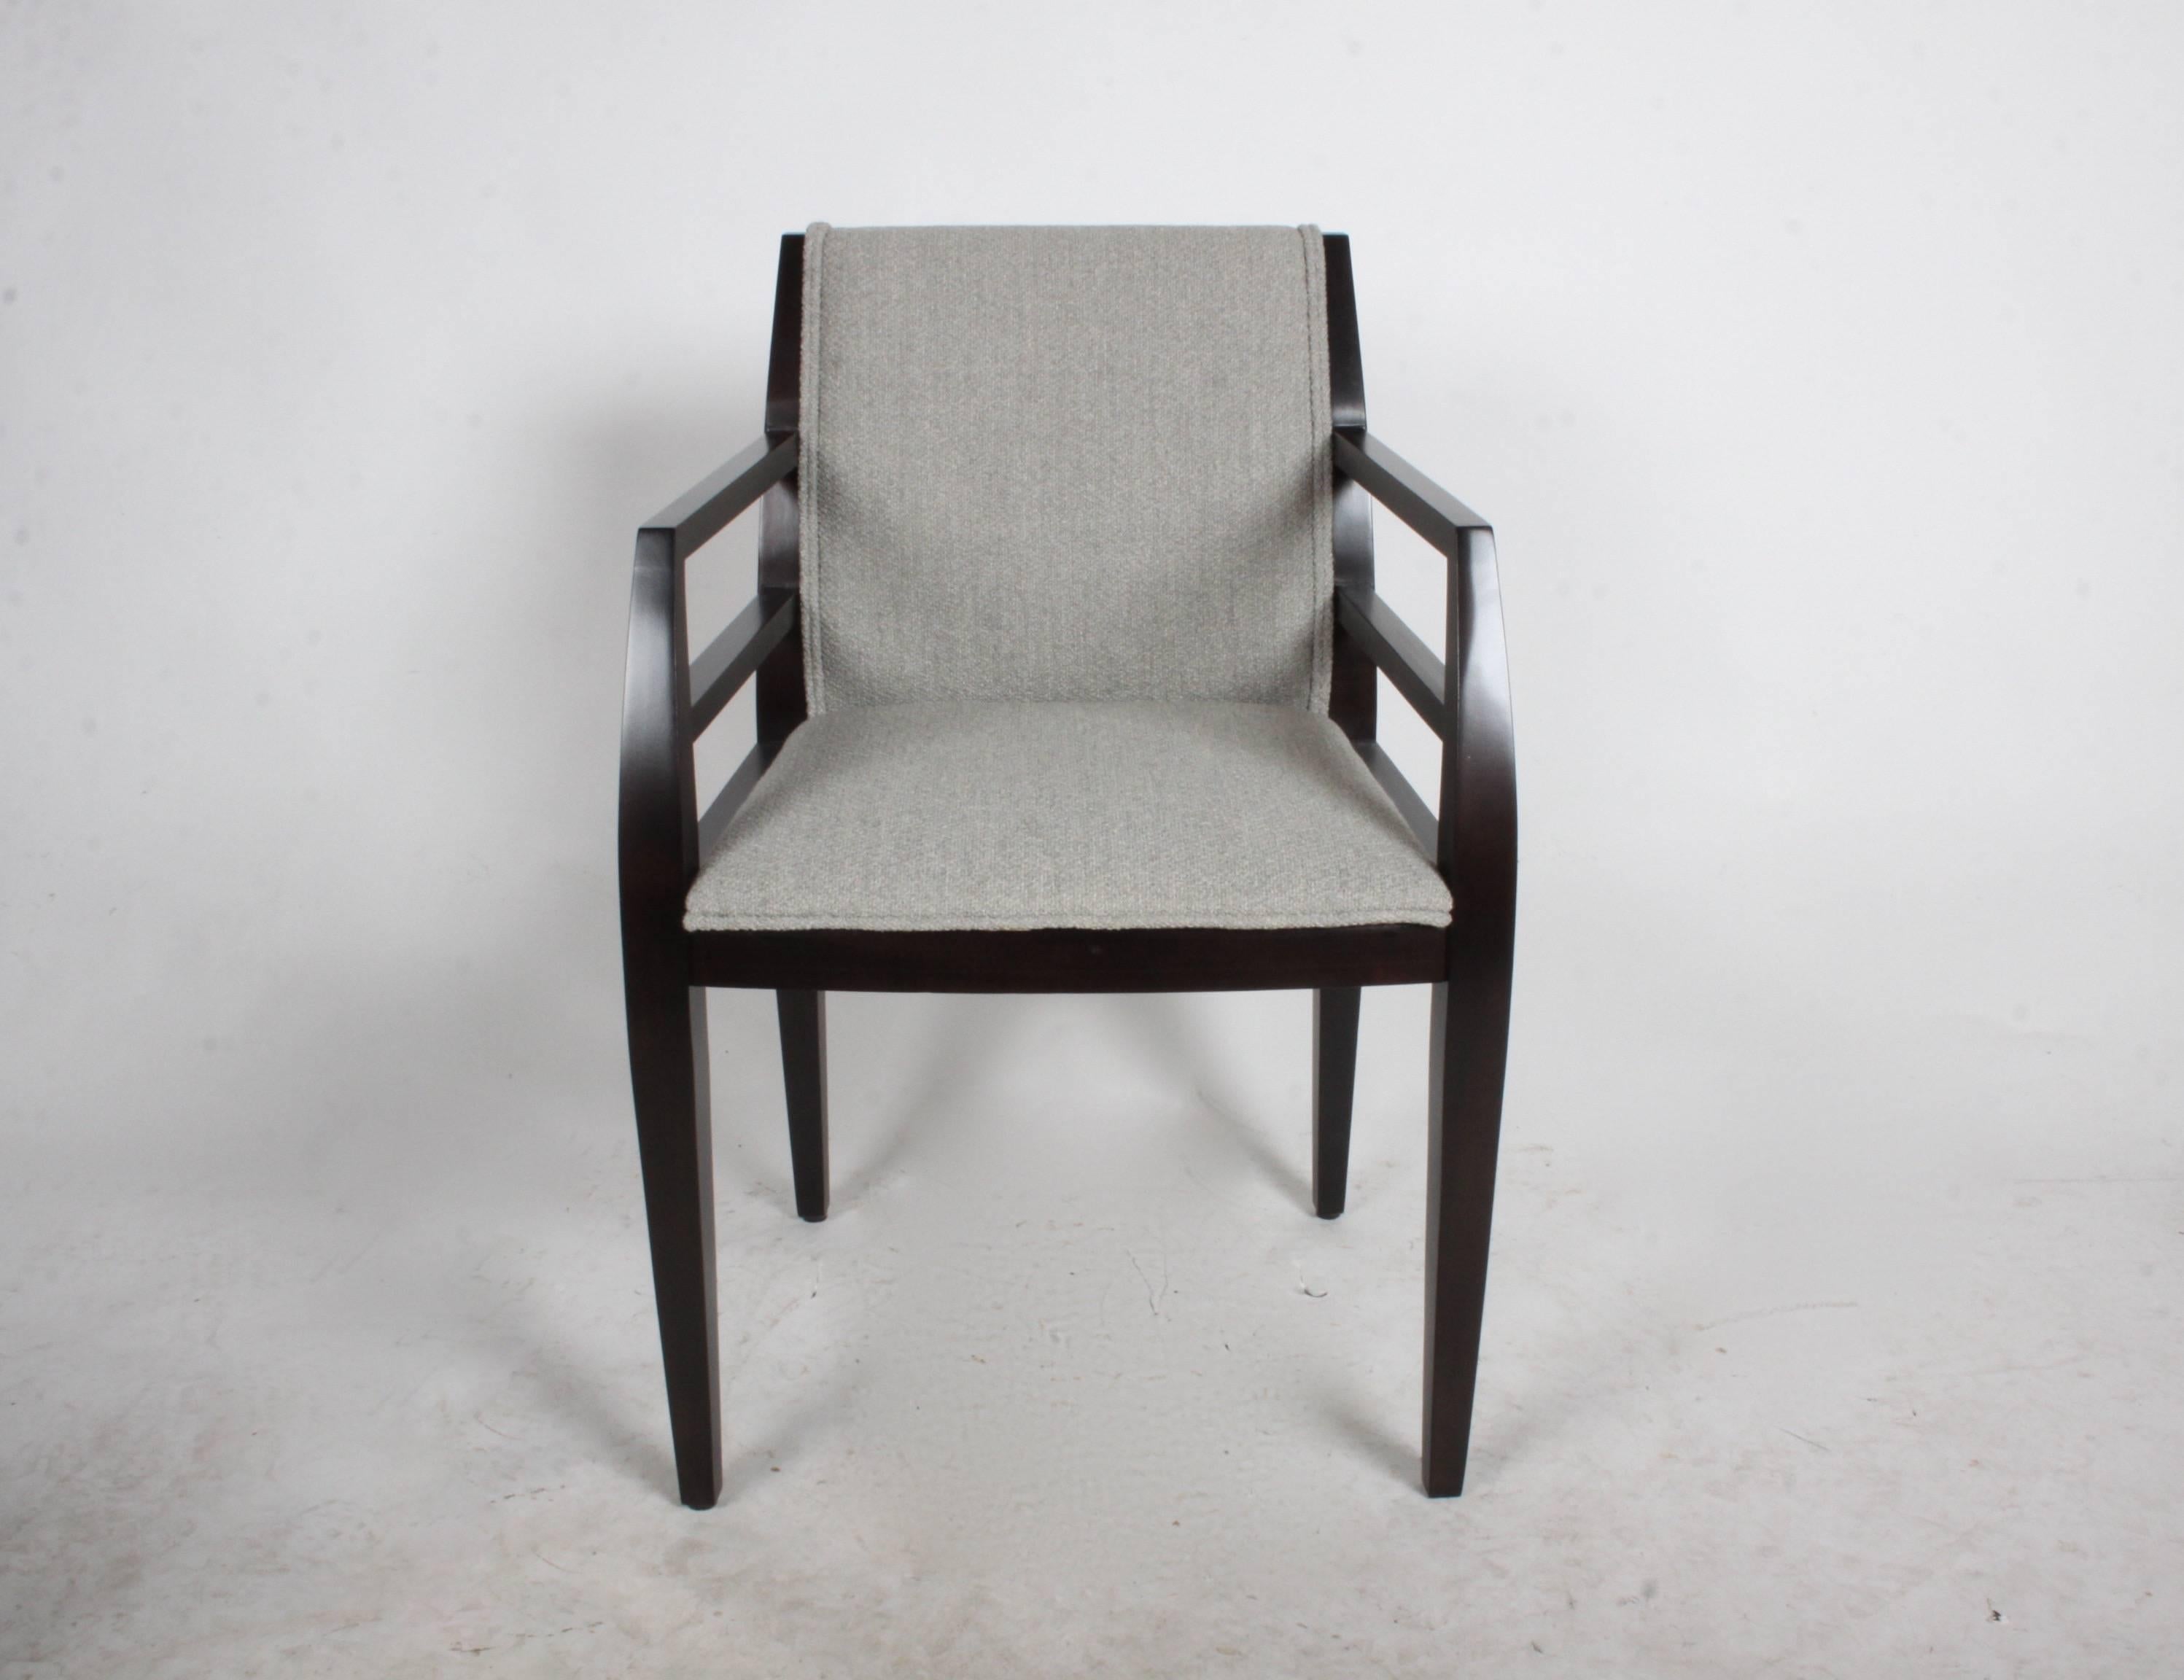 Set of eight Arbat cubist arm dining chairs designed by architect Constantin Boym for Brickell. The chairs bold lines are inspired by Russian Constructivist architecture. Refinished hard maple frames in an ebony stain, includes re-upholstery COM.